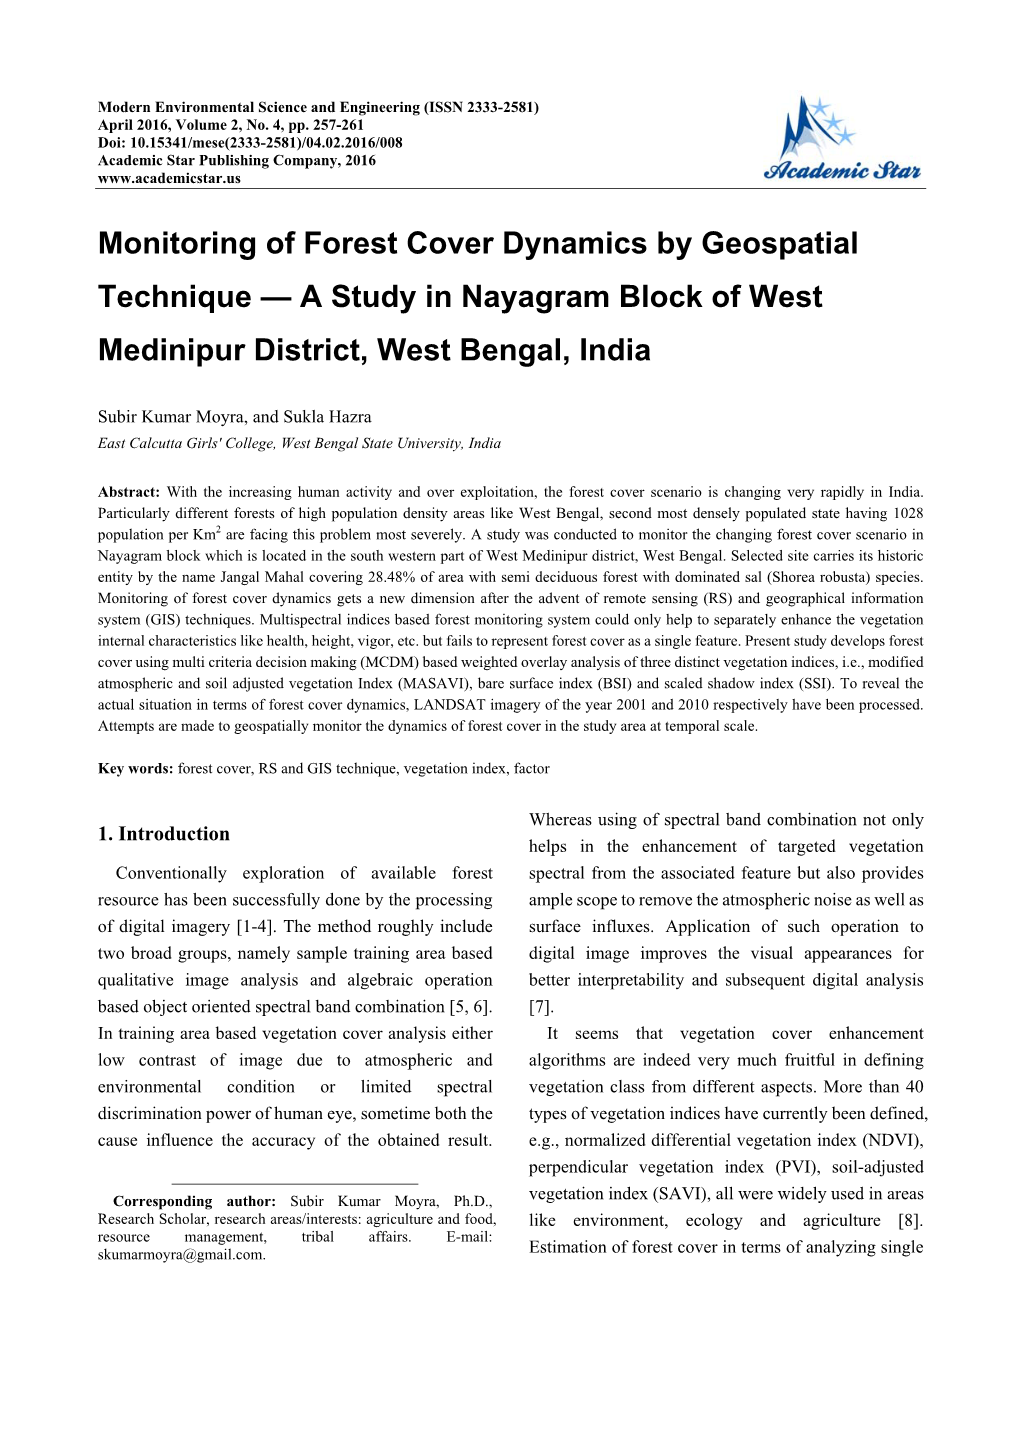 Monitoring of Forest Cover Dynamics by Geospatial Technique — a Study in Nayagram Block of West Medinipur District, West Bengal, India